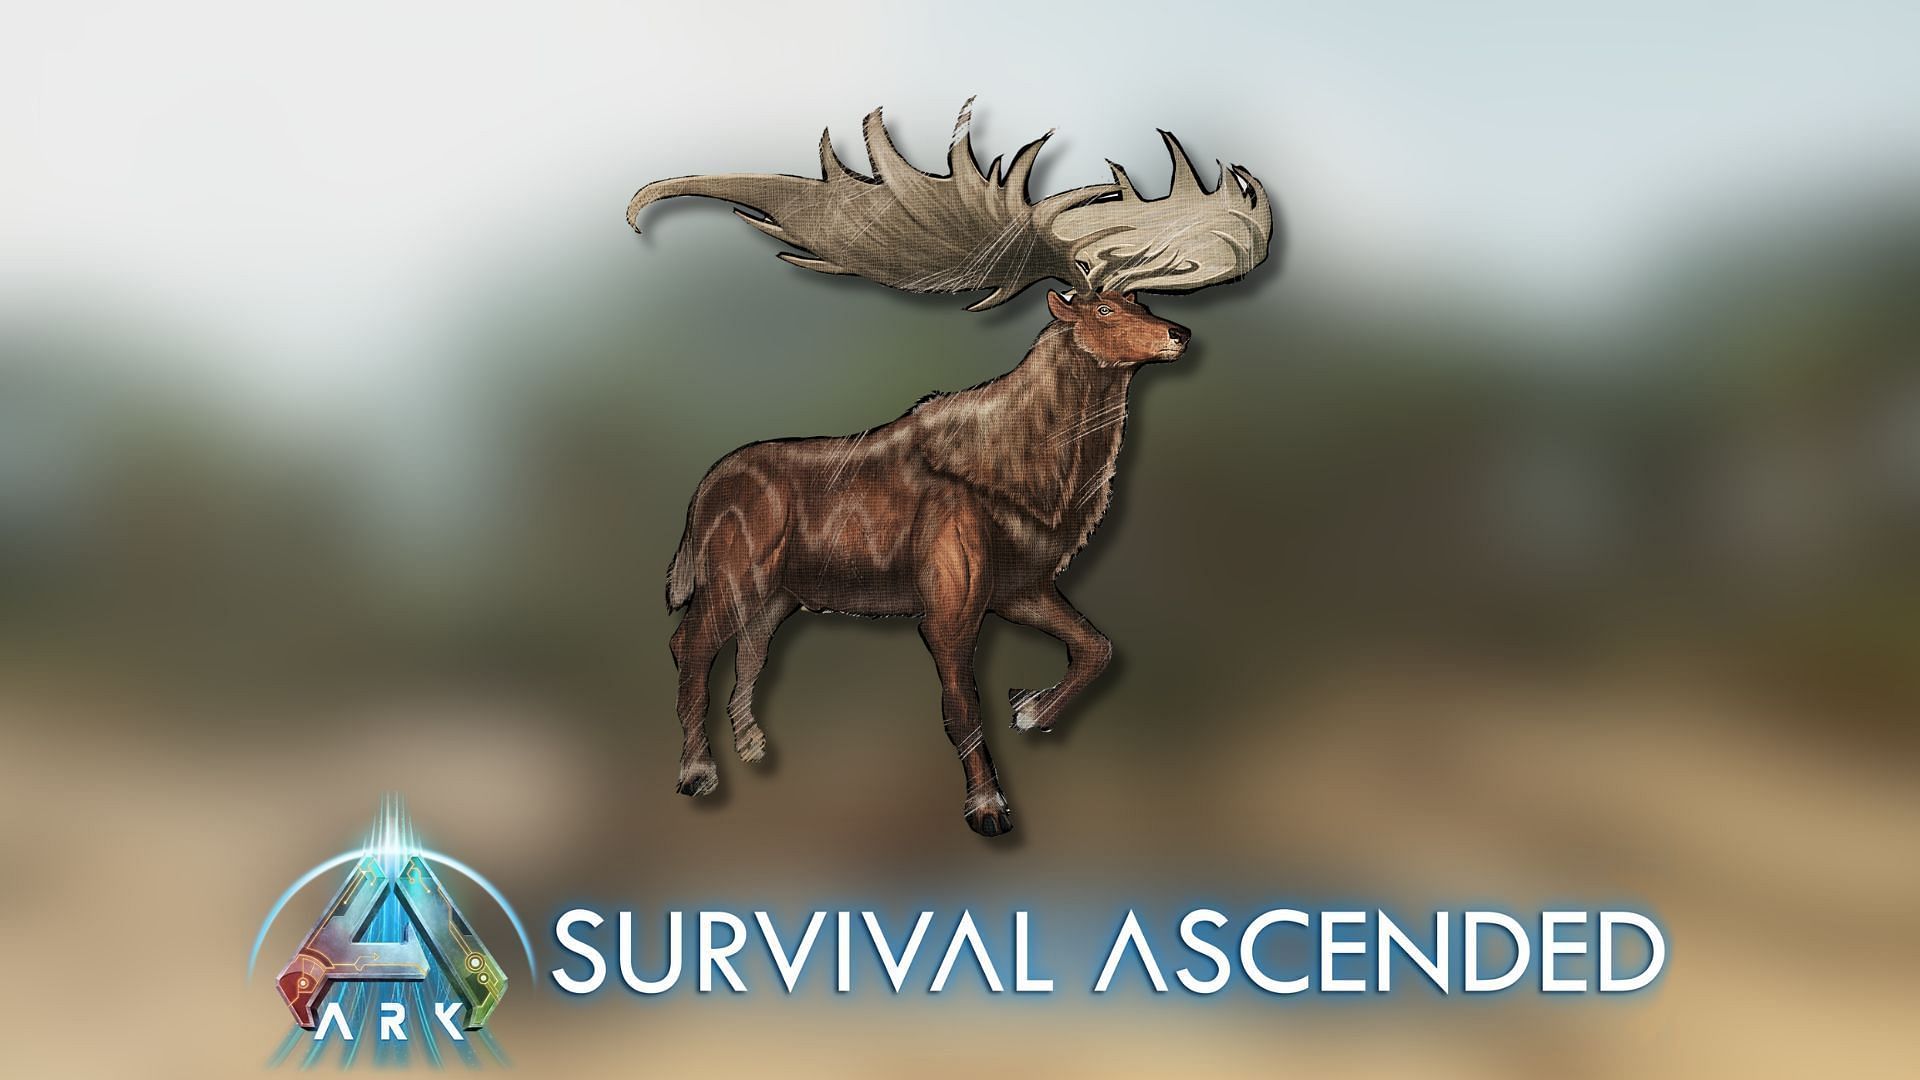 Megaloceros can be used for traveling and going inside caves (Image via Studio Wildcard)